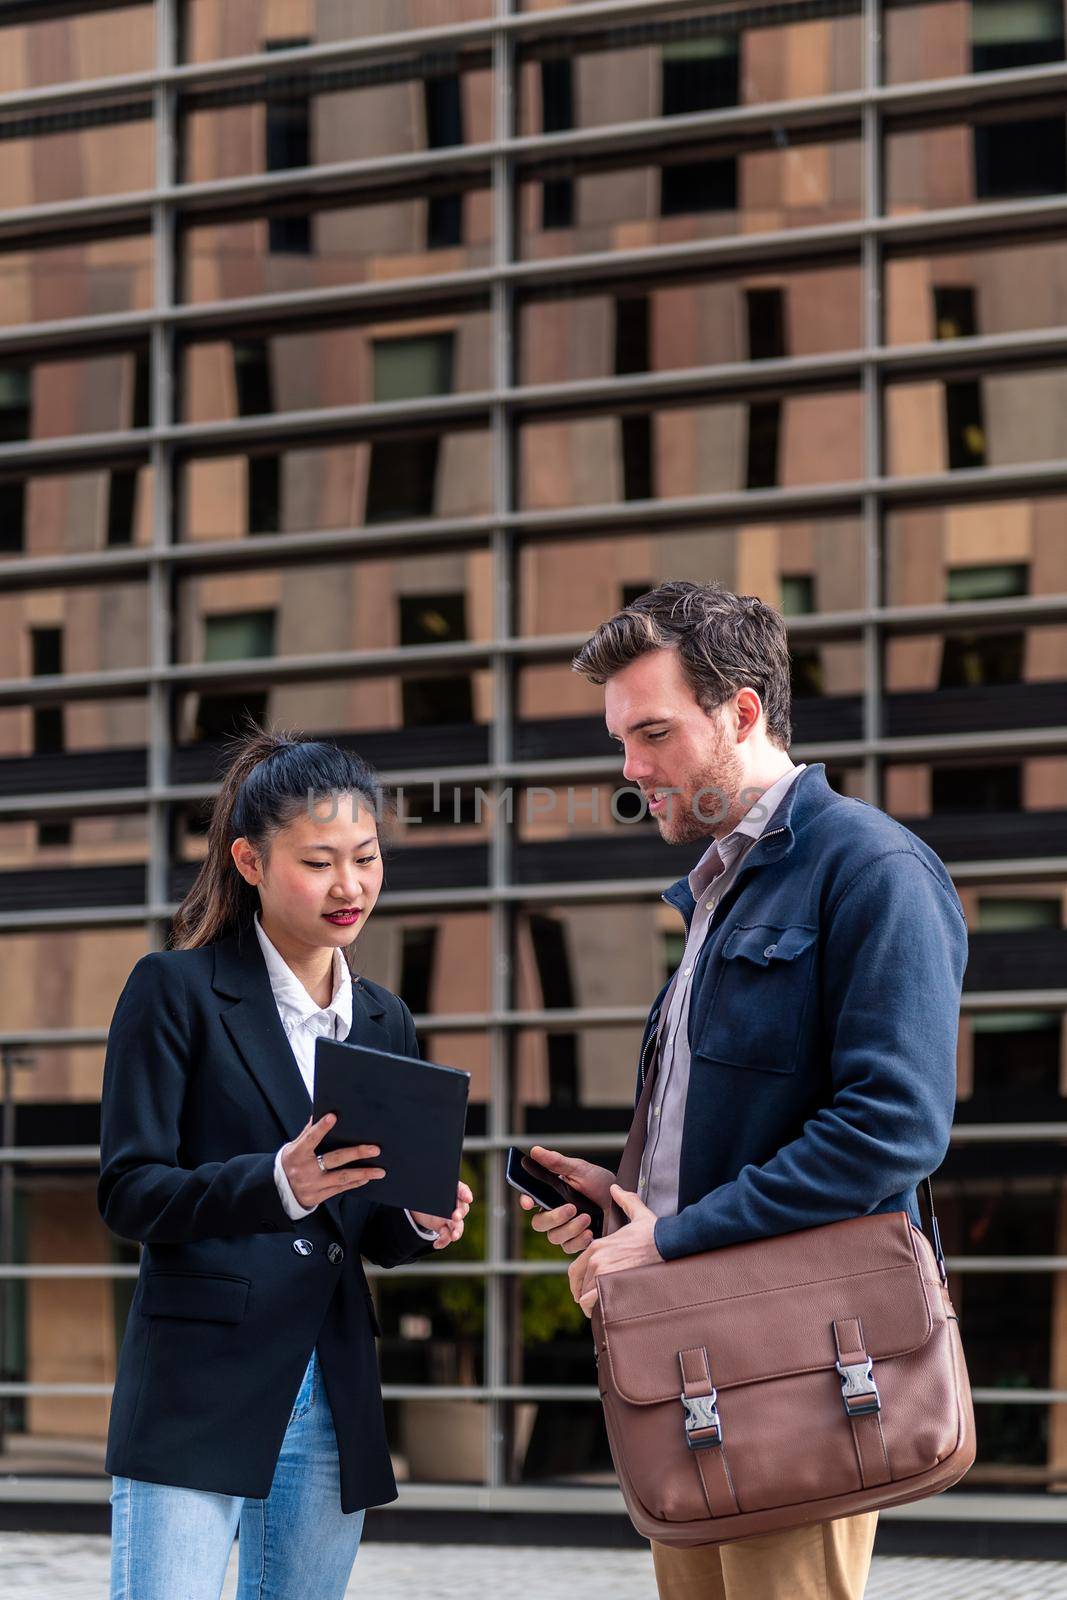 young businesswoman showing her tablet to a businessman next to an office building in the financial district, concept of entrepreneurship and business, copy space for text